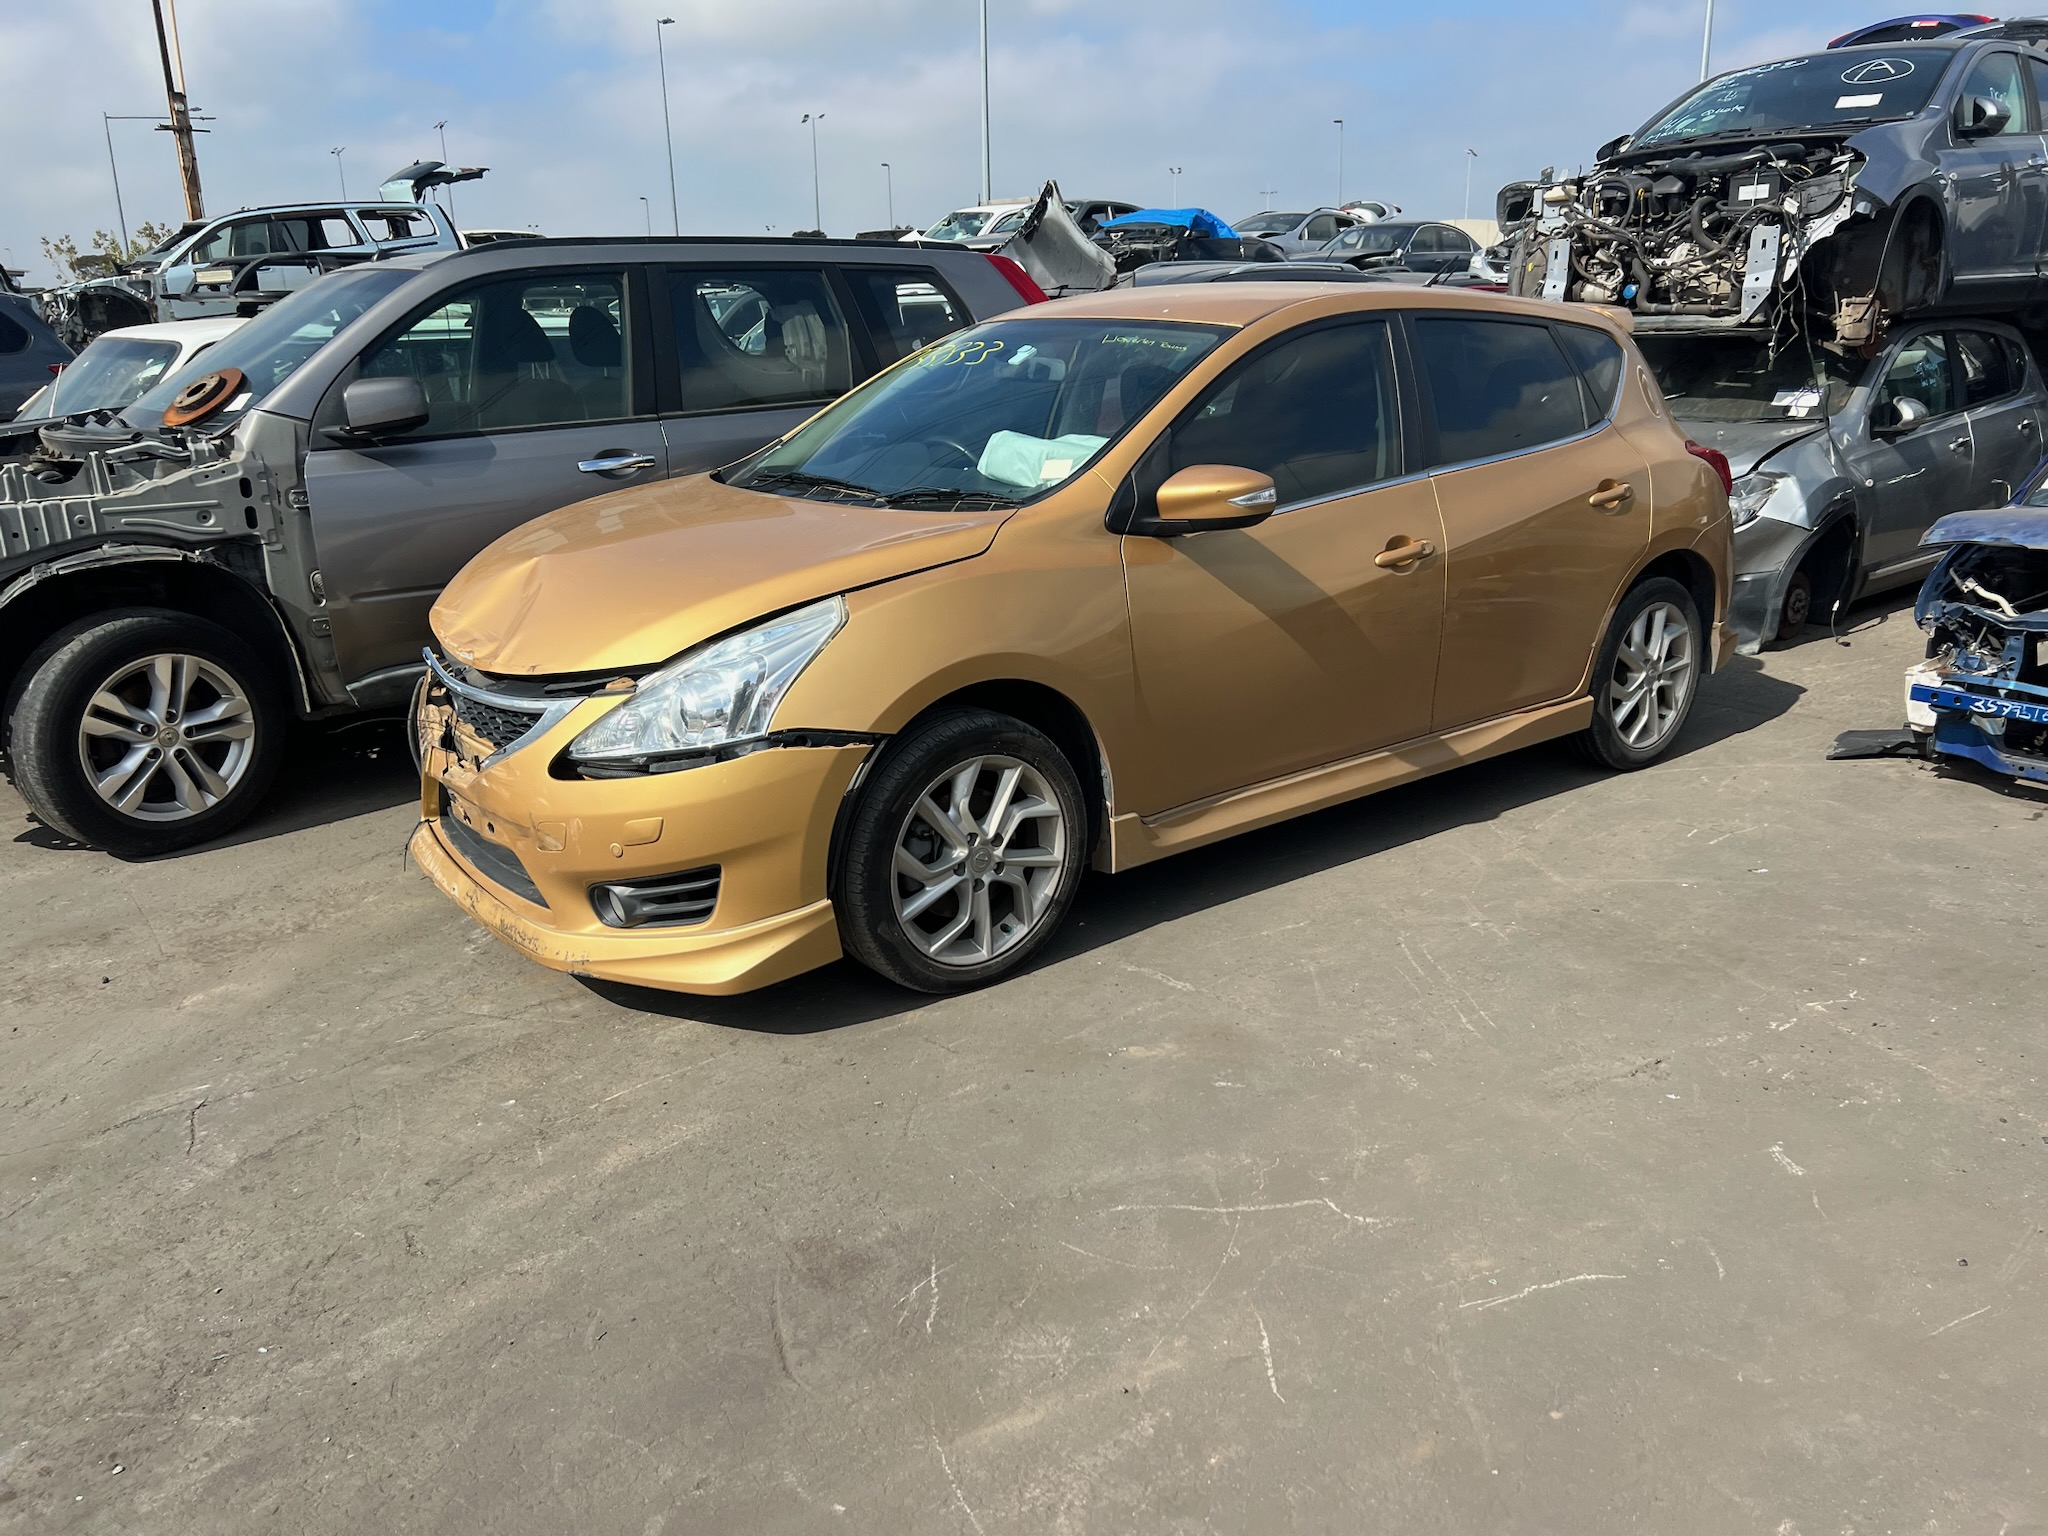 PARTING OUT NISSAN PULSAR C12 SSS HATCH TURBO PETROL GOLD 2015 WRECKING